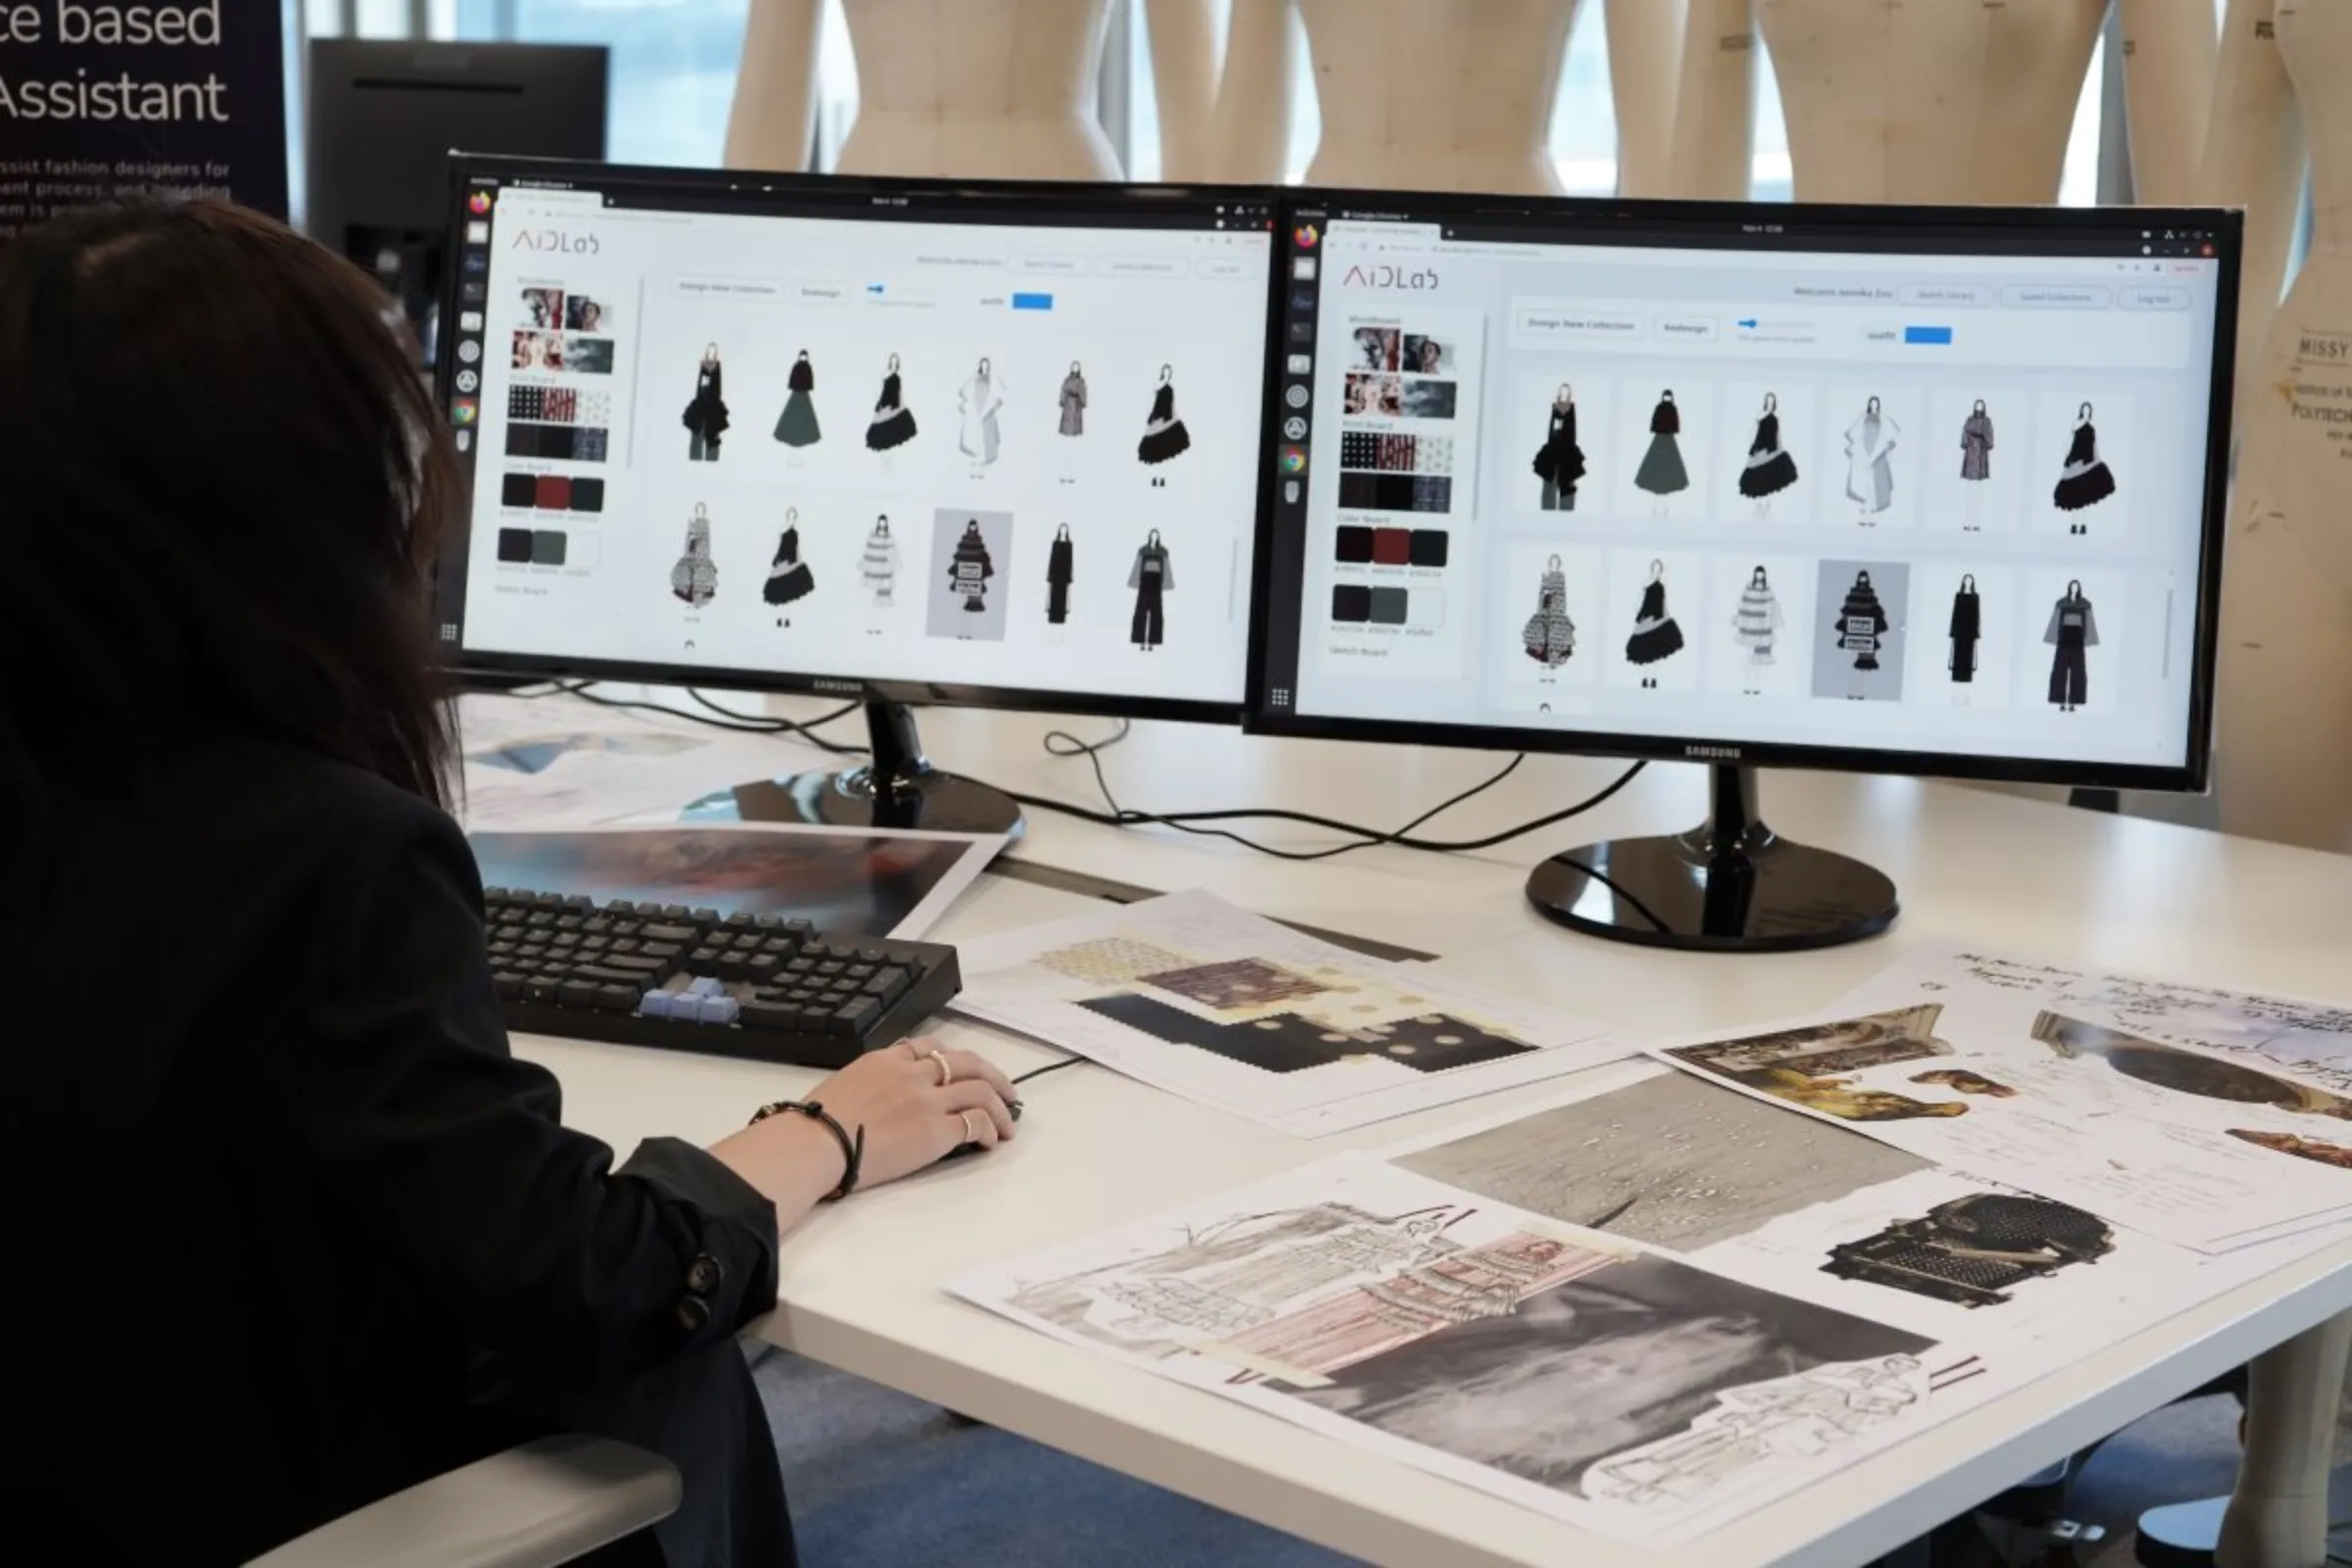 A woman uses AI-based Interactive Design Assistant for Fashion (AiDA). November 4, 2021. Laboratory for Artificial Intelligence in Design/Handout via Thomson Reuters Foundation